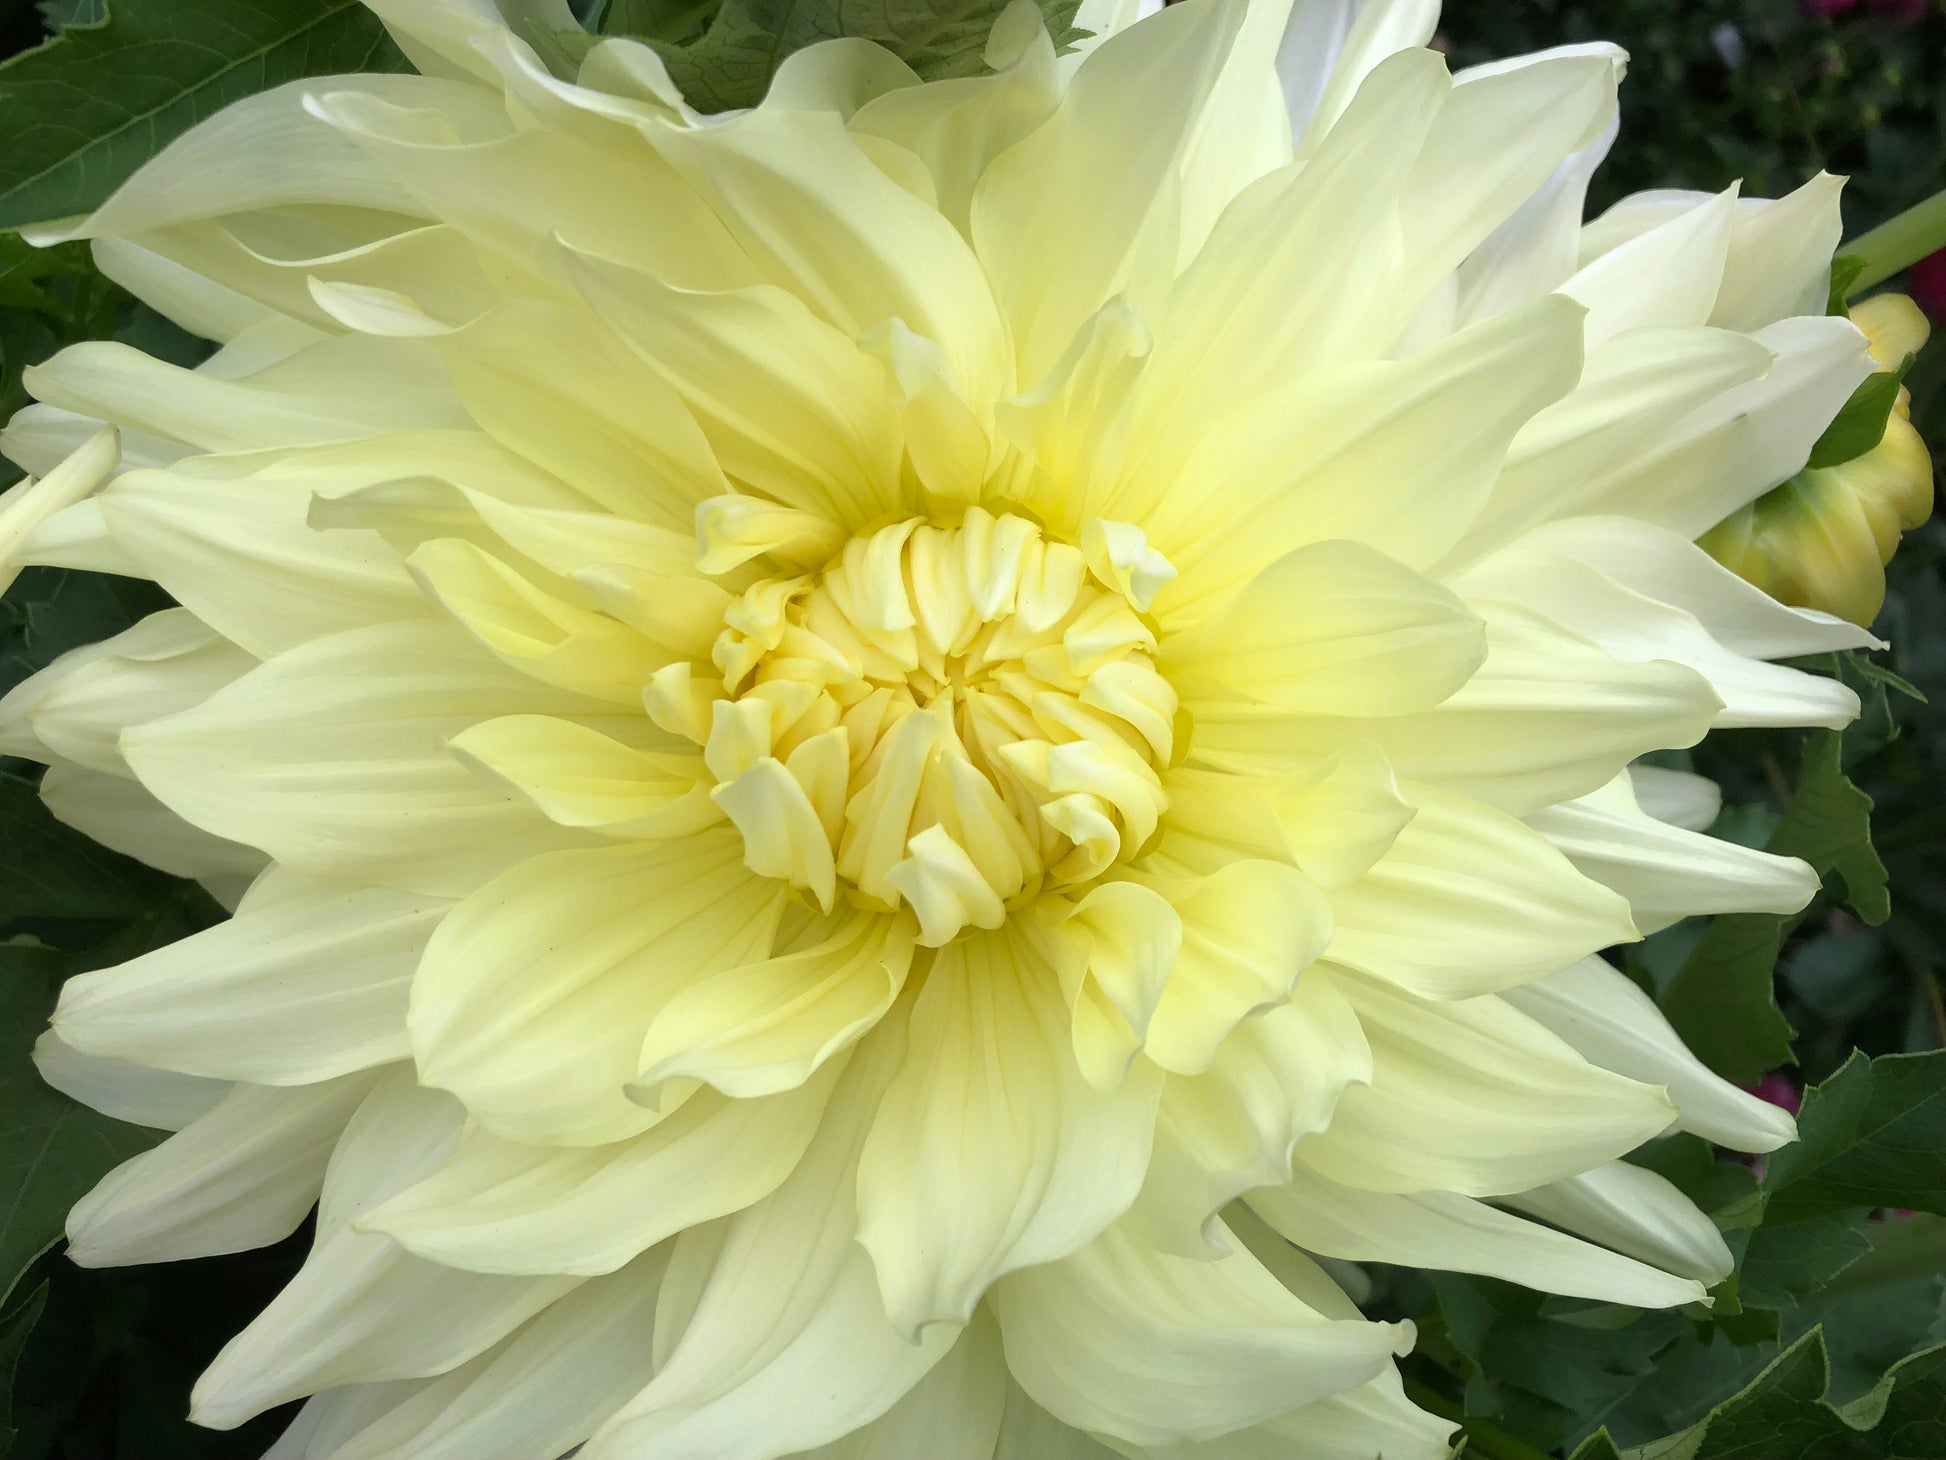 Snow Country Dahlia Tubers At Flower Feather Farm,, 47% OFF